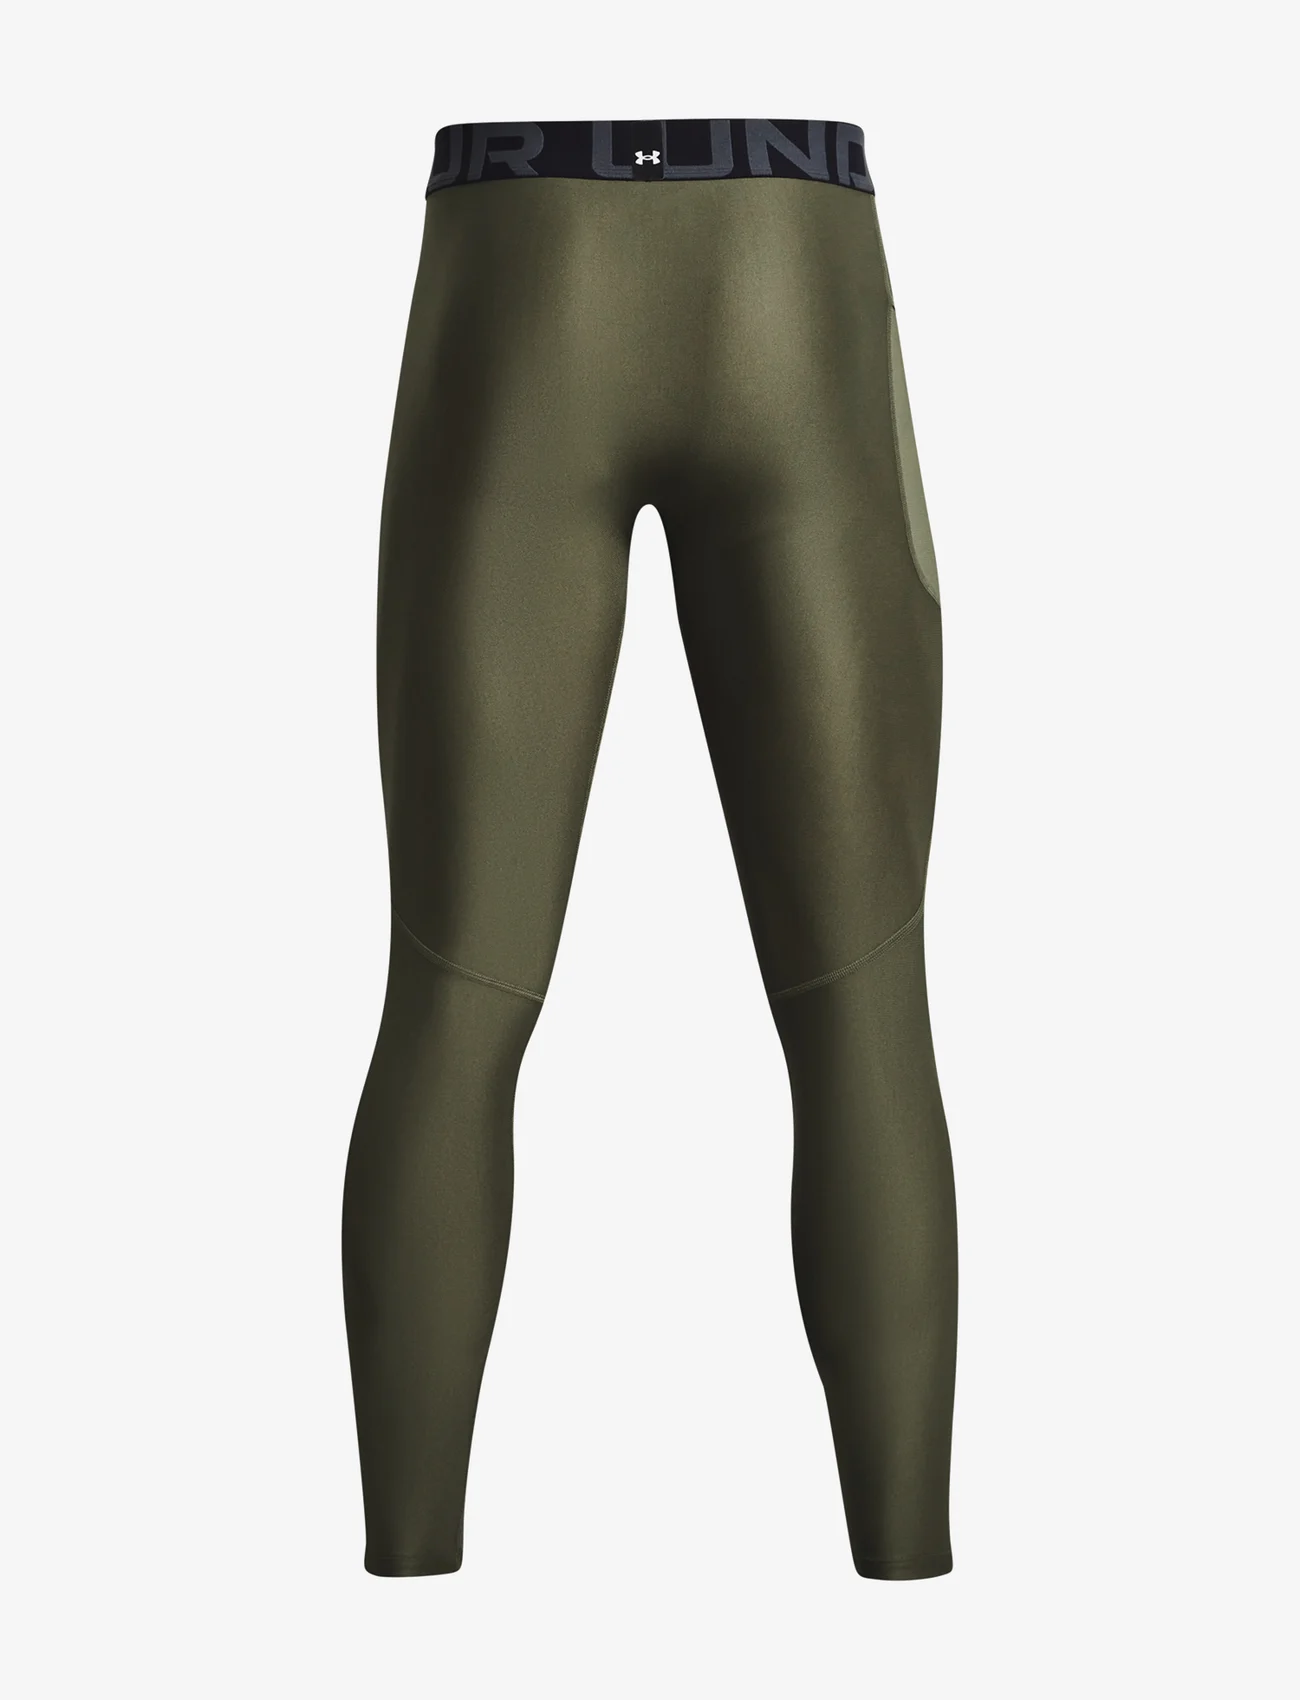 Under Armour - UA HG Armour Leggings - lowest prices - marine od green - 1